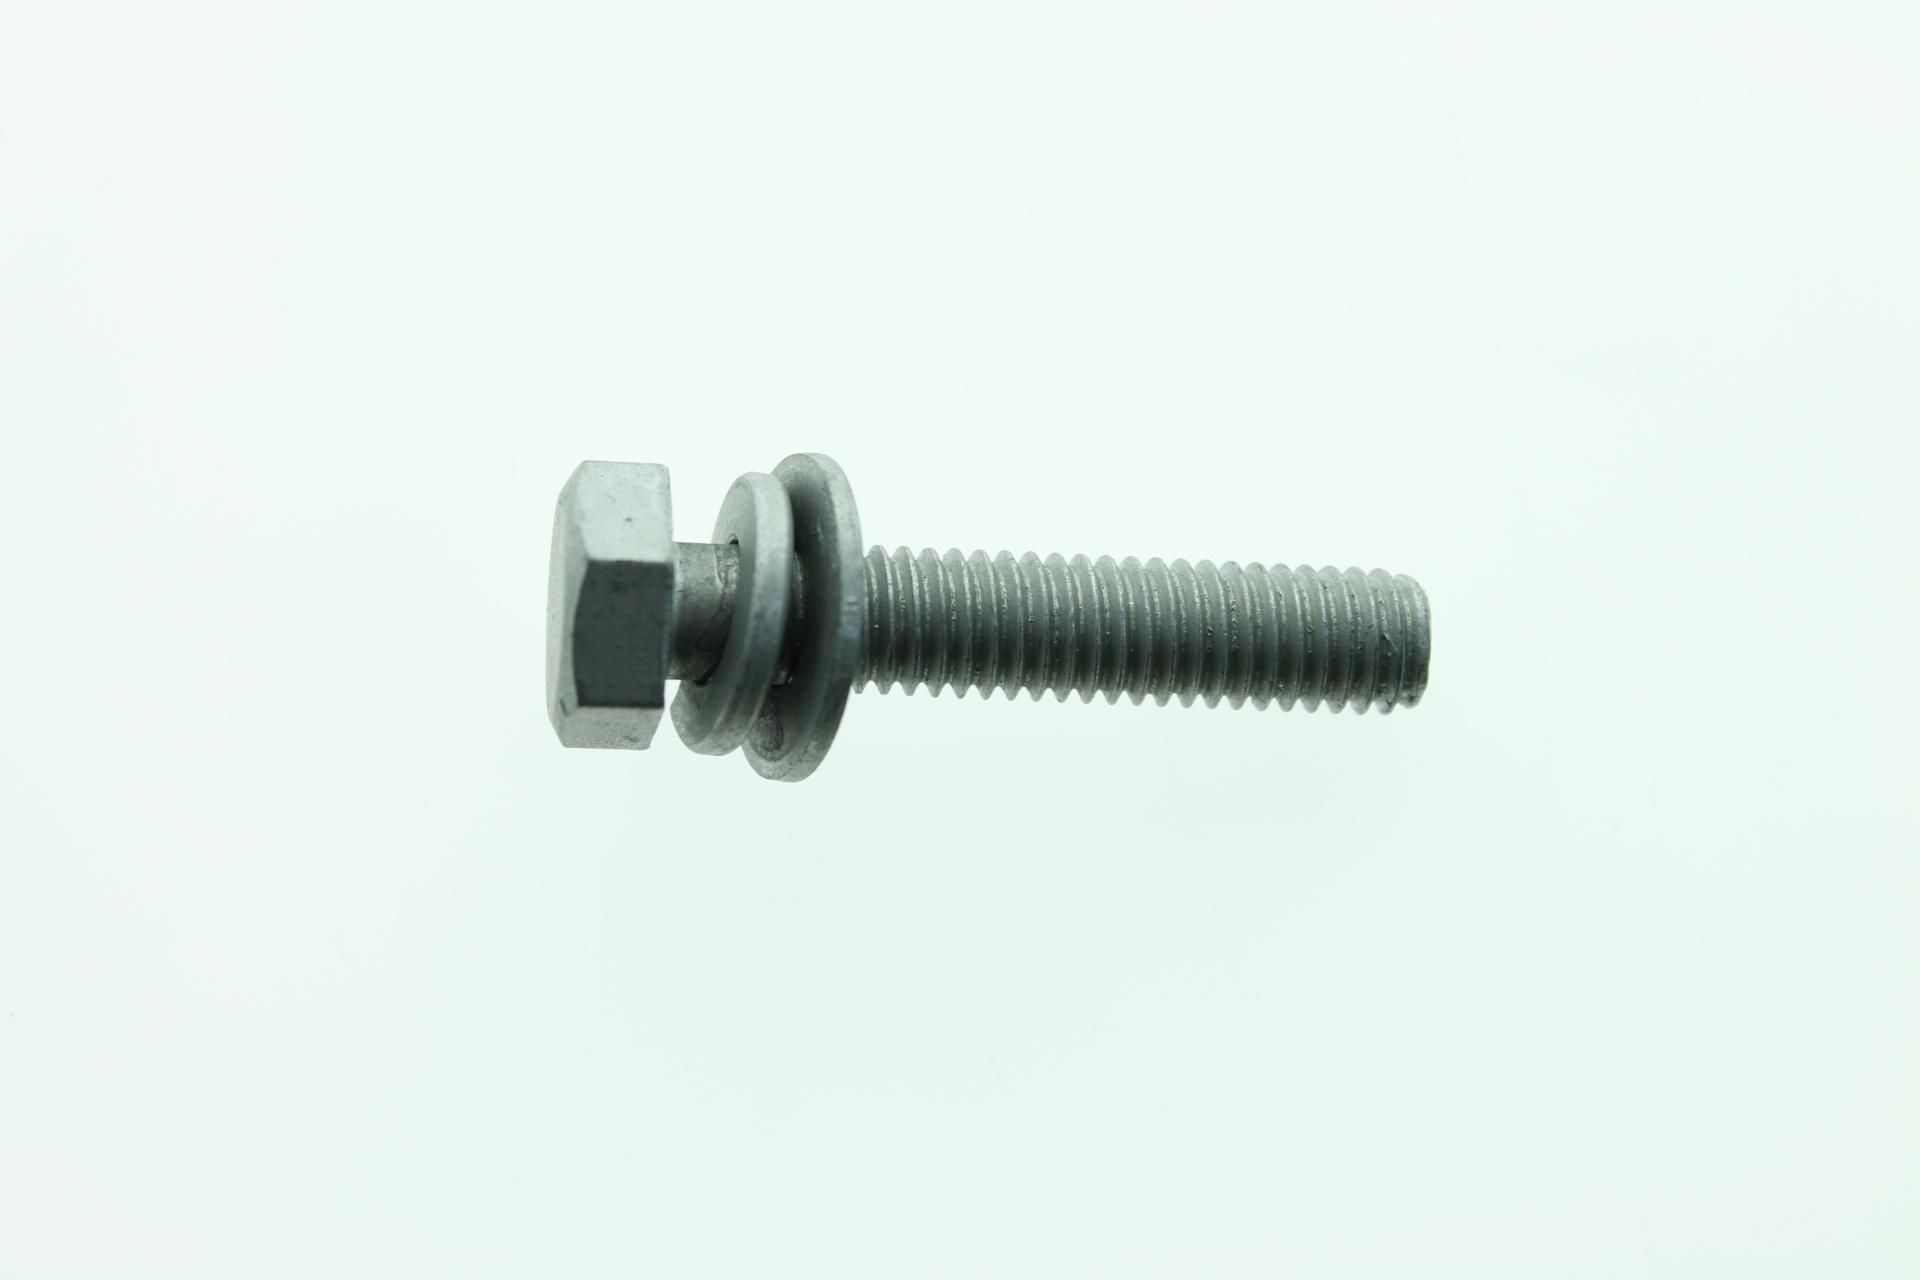 90119-06929-00 BOLT, WITH WASHER